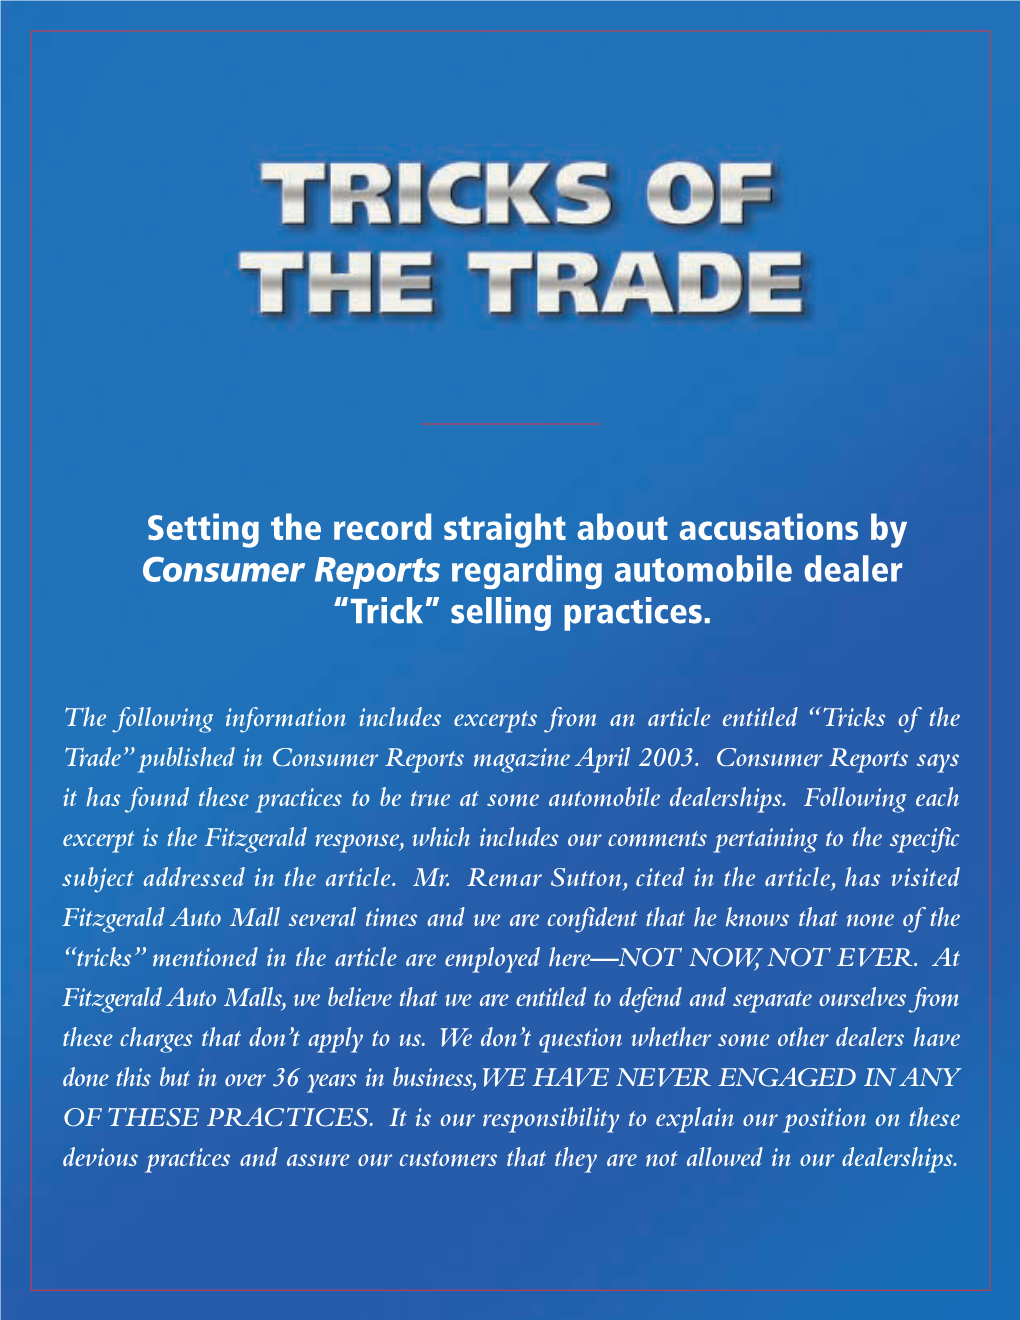 Setting the Record Straight About Accusations by Consumer Reports Regarding Automobile Dealer “Trick” Selling Practices